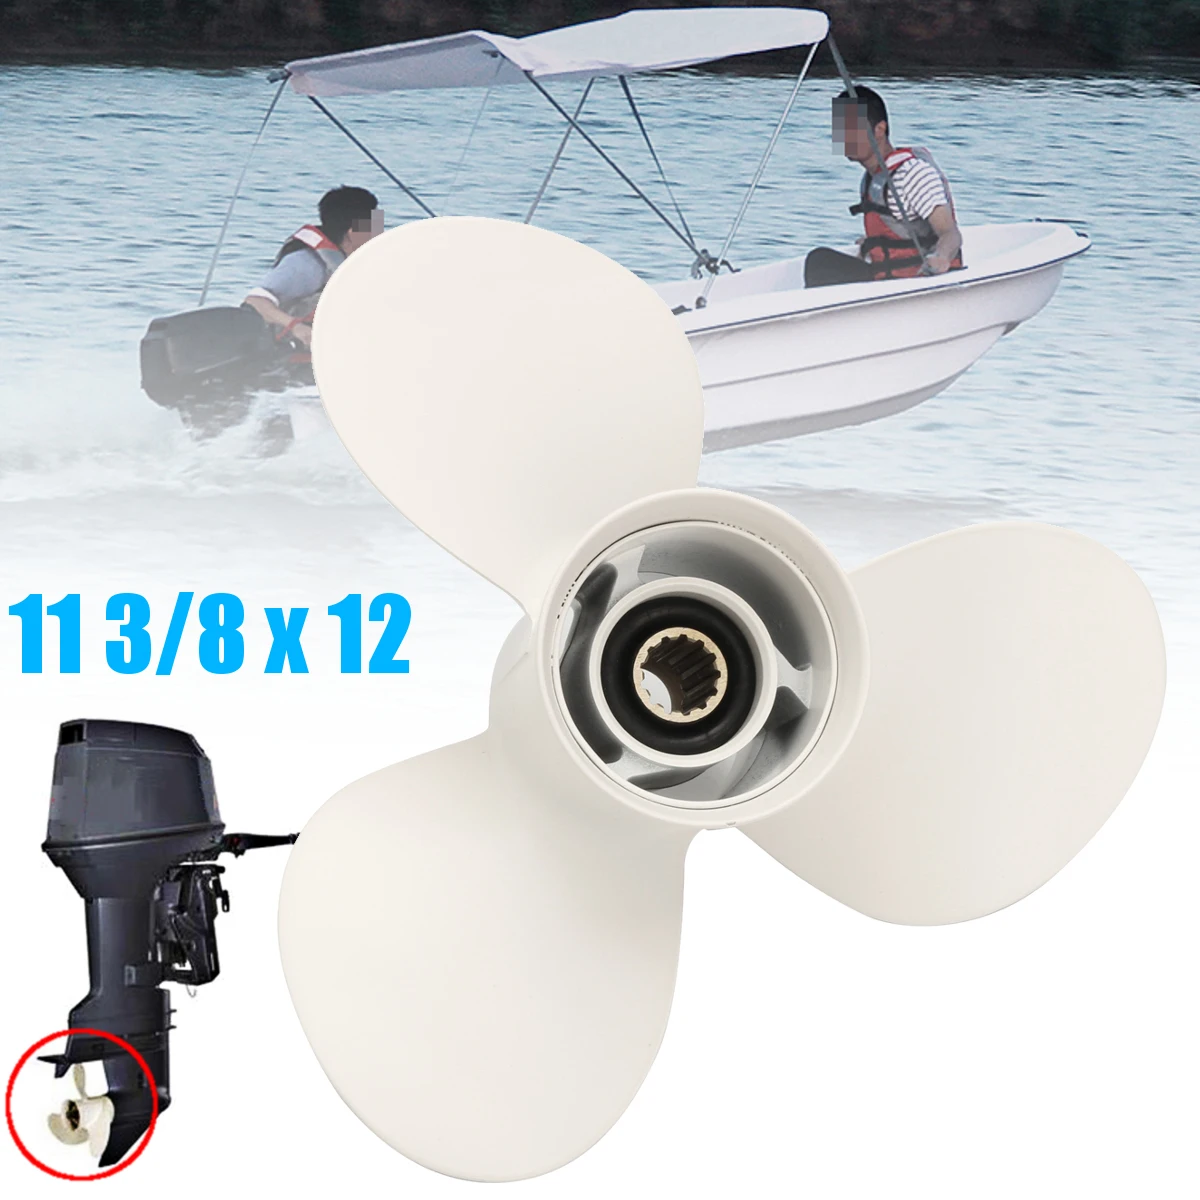 11 3/8 X 12 For 40hp 50hp 60hp For Yamaha 3 Blades Aluminium Propellers Outboard Boat Motors Marine Propeller in stock dji t30 drone foldable propeller 3820 carbon fiber propellers cw